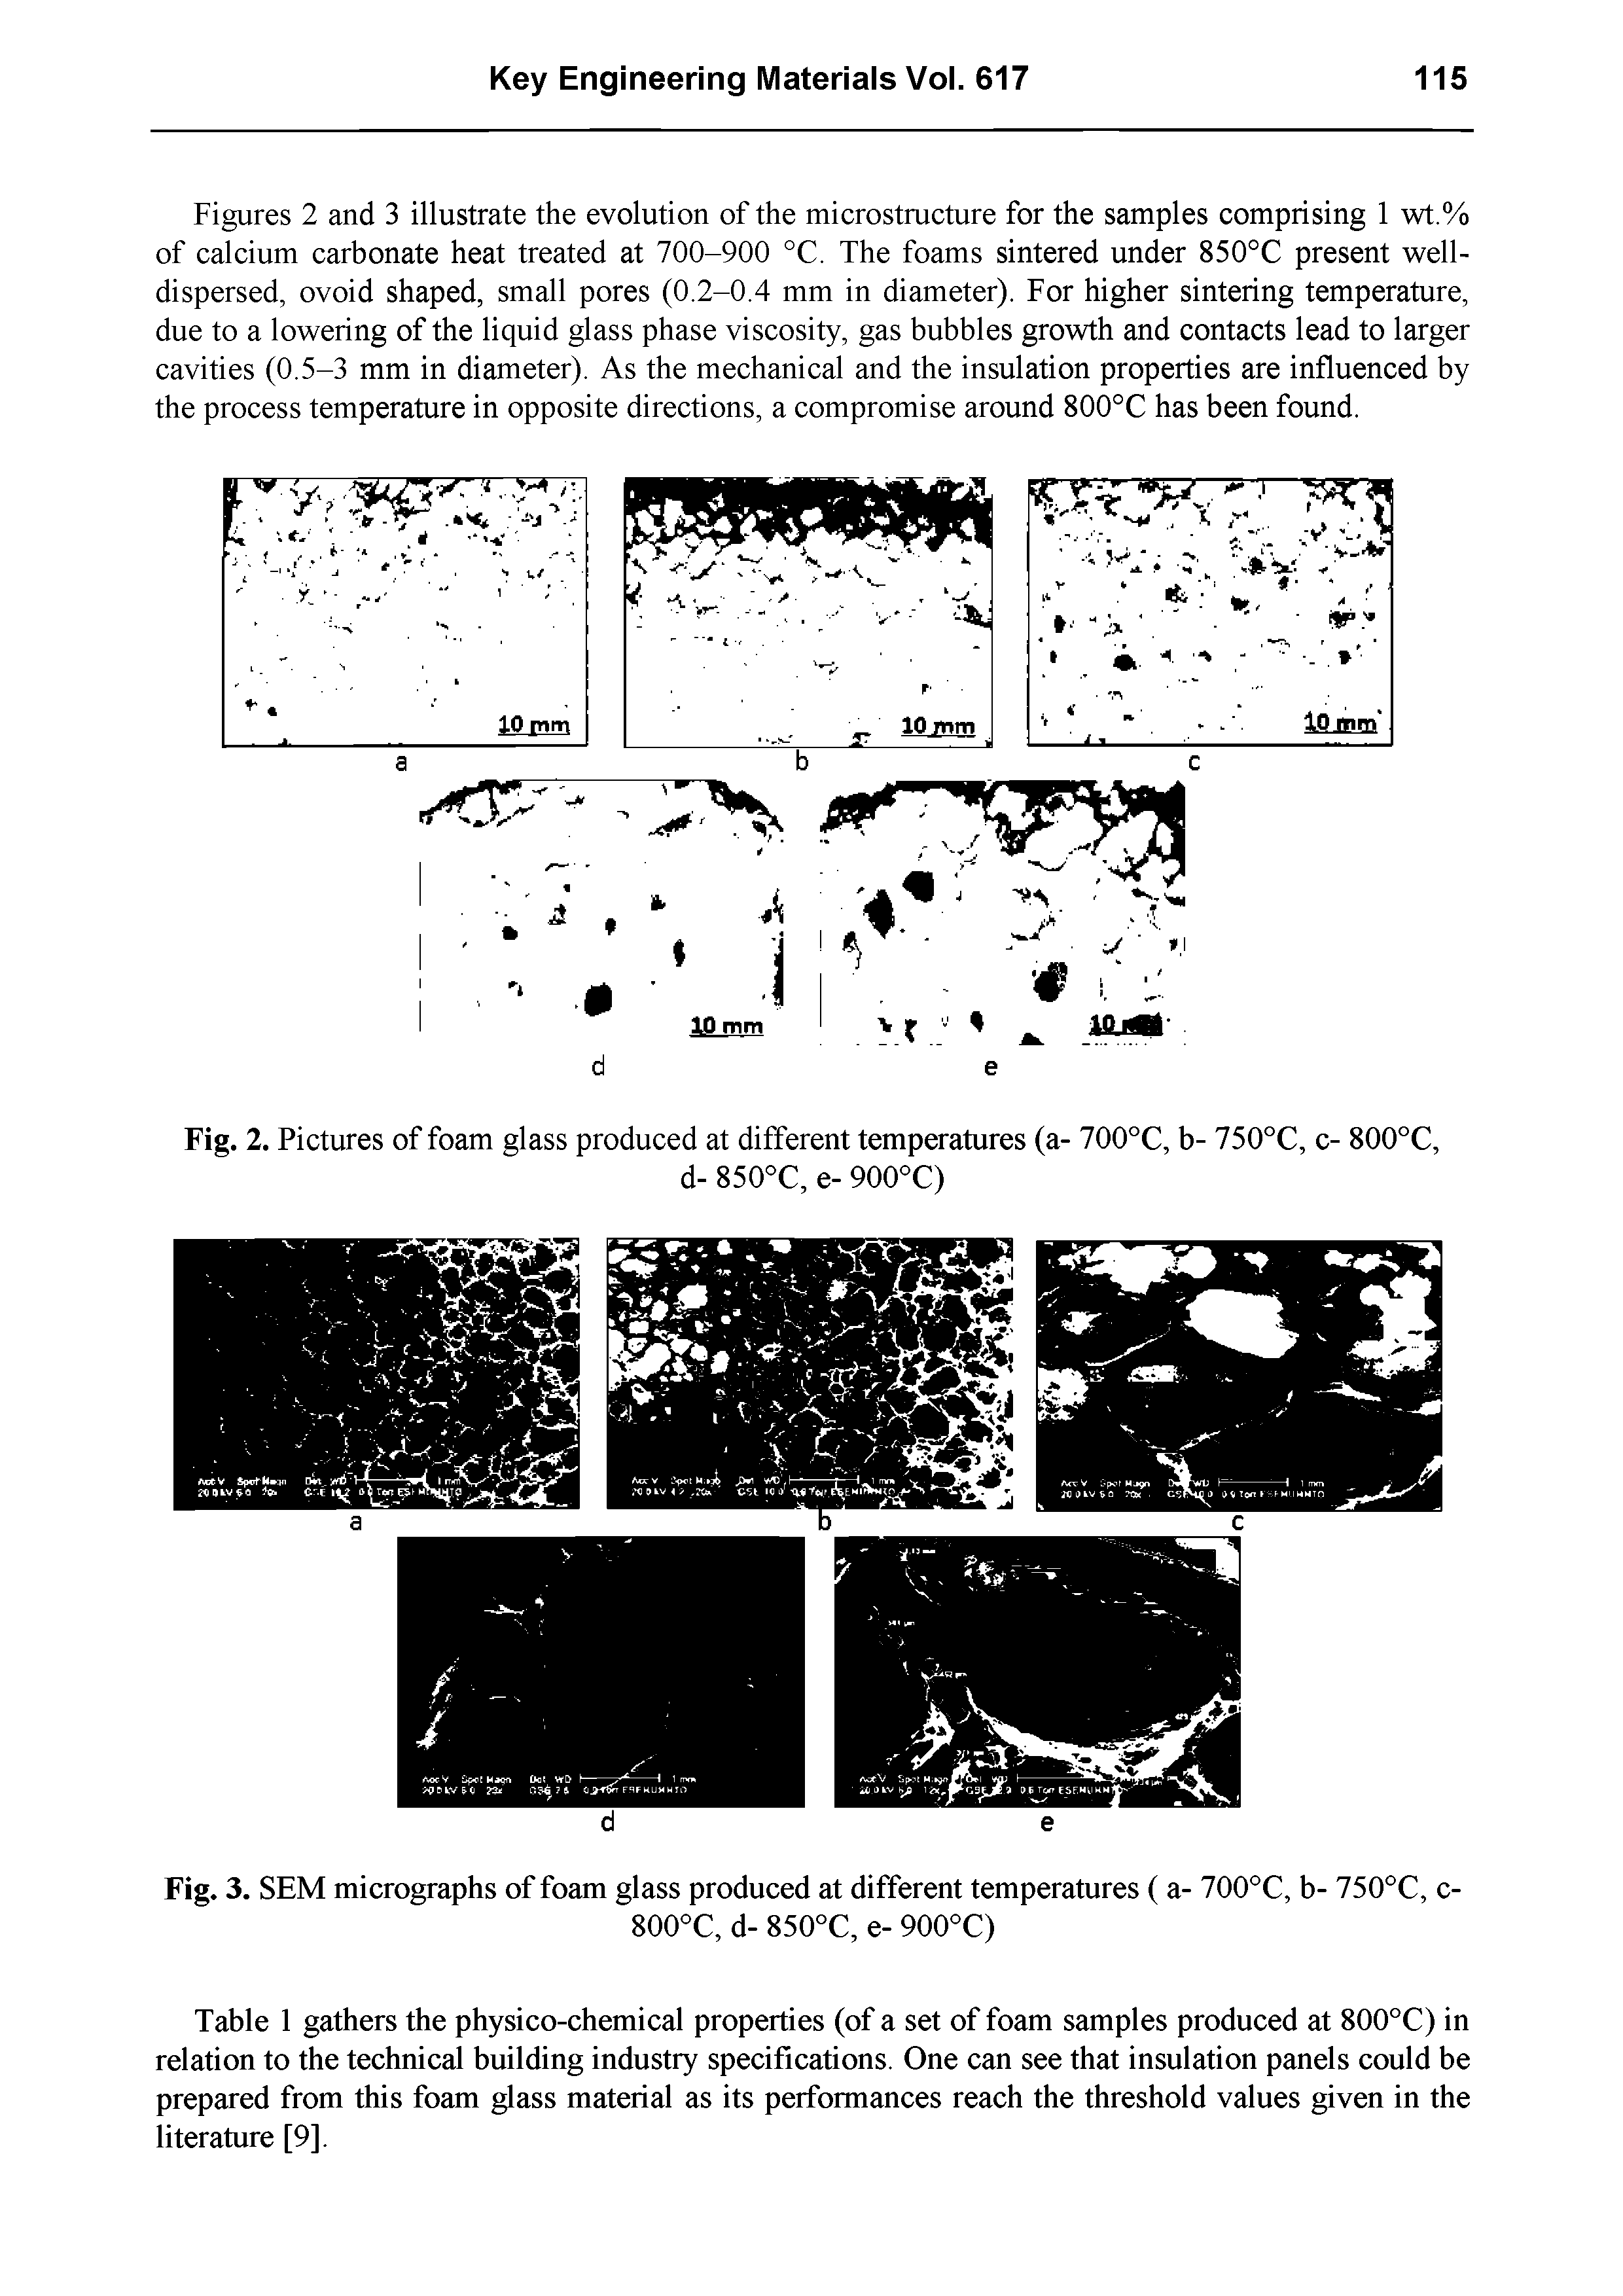 Figures 2 and 3 illustrate the evolution of the microstructure for the samples comprising 1 wt.% of calcium carbonate heat treated at 700-900 °C. The foams sintered under 850°C present well-dispersed, ovoid shaped, small pores (0.2-0.4 mm in diameter). For higher sintering temperature, due to a lowering of the liquid glass phase viscosity, gas bubbles growth and contacts lead to larger cavities (0.5-3 mm in diameter). As the mechanical and the insulation properties are influenced by the process temperature in opposite directions, a compromise around 800°C has been found.